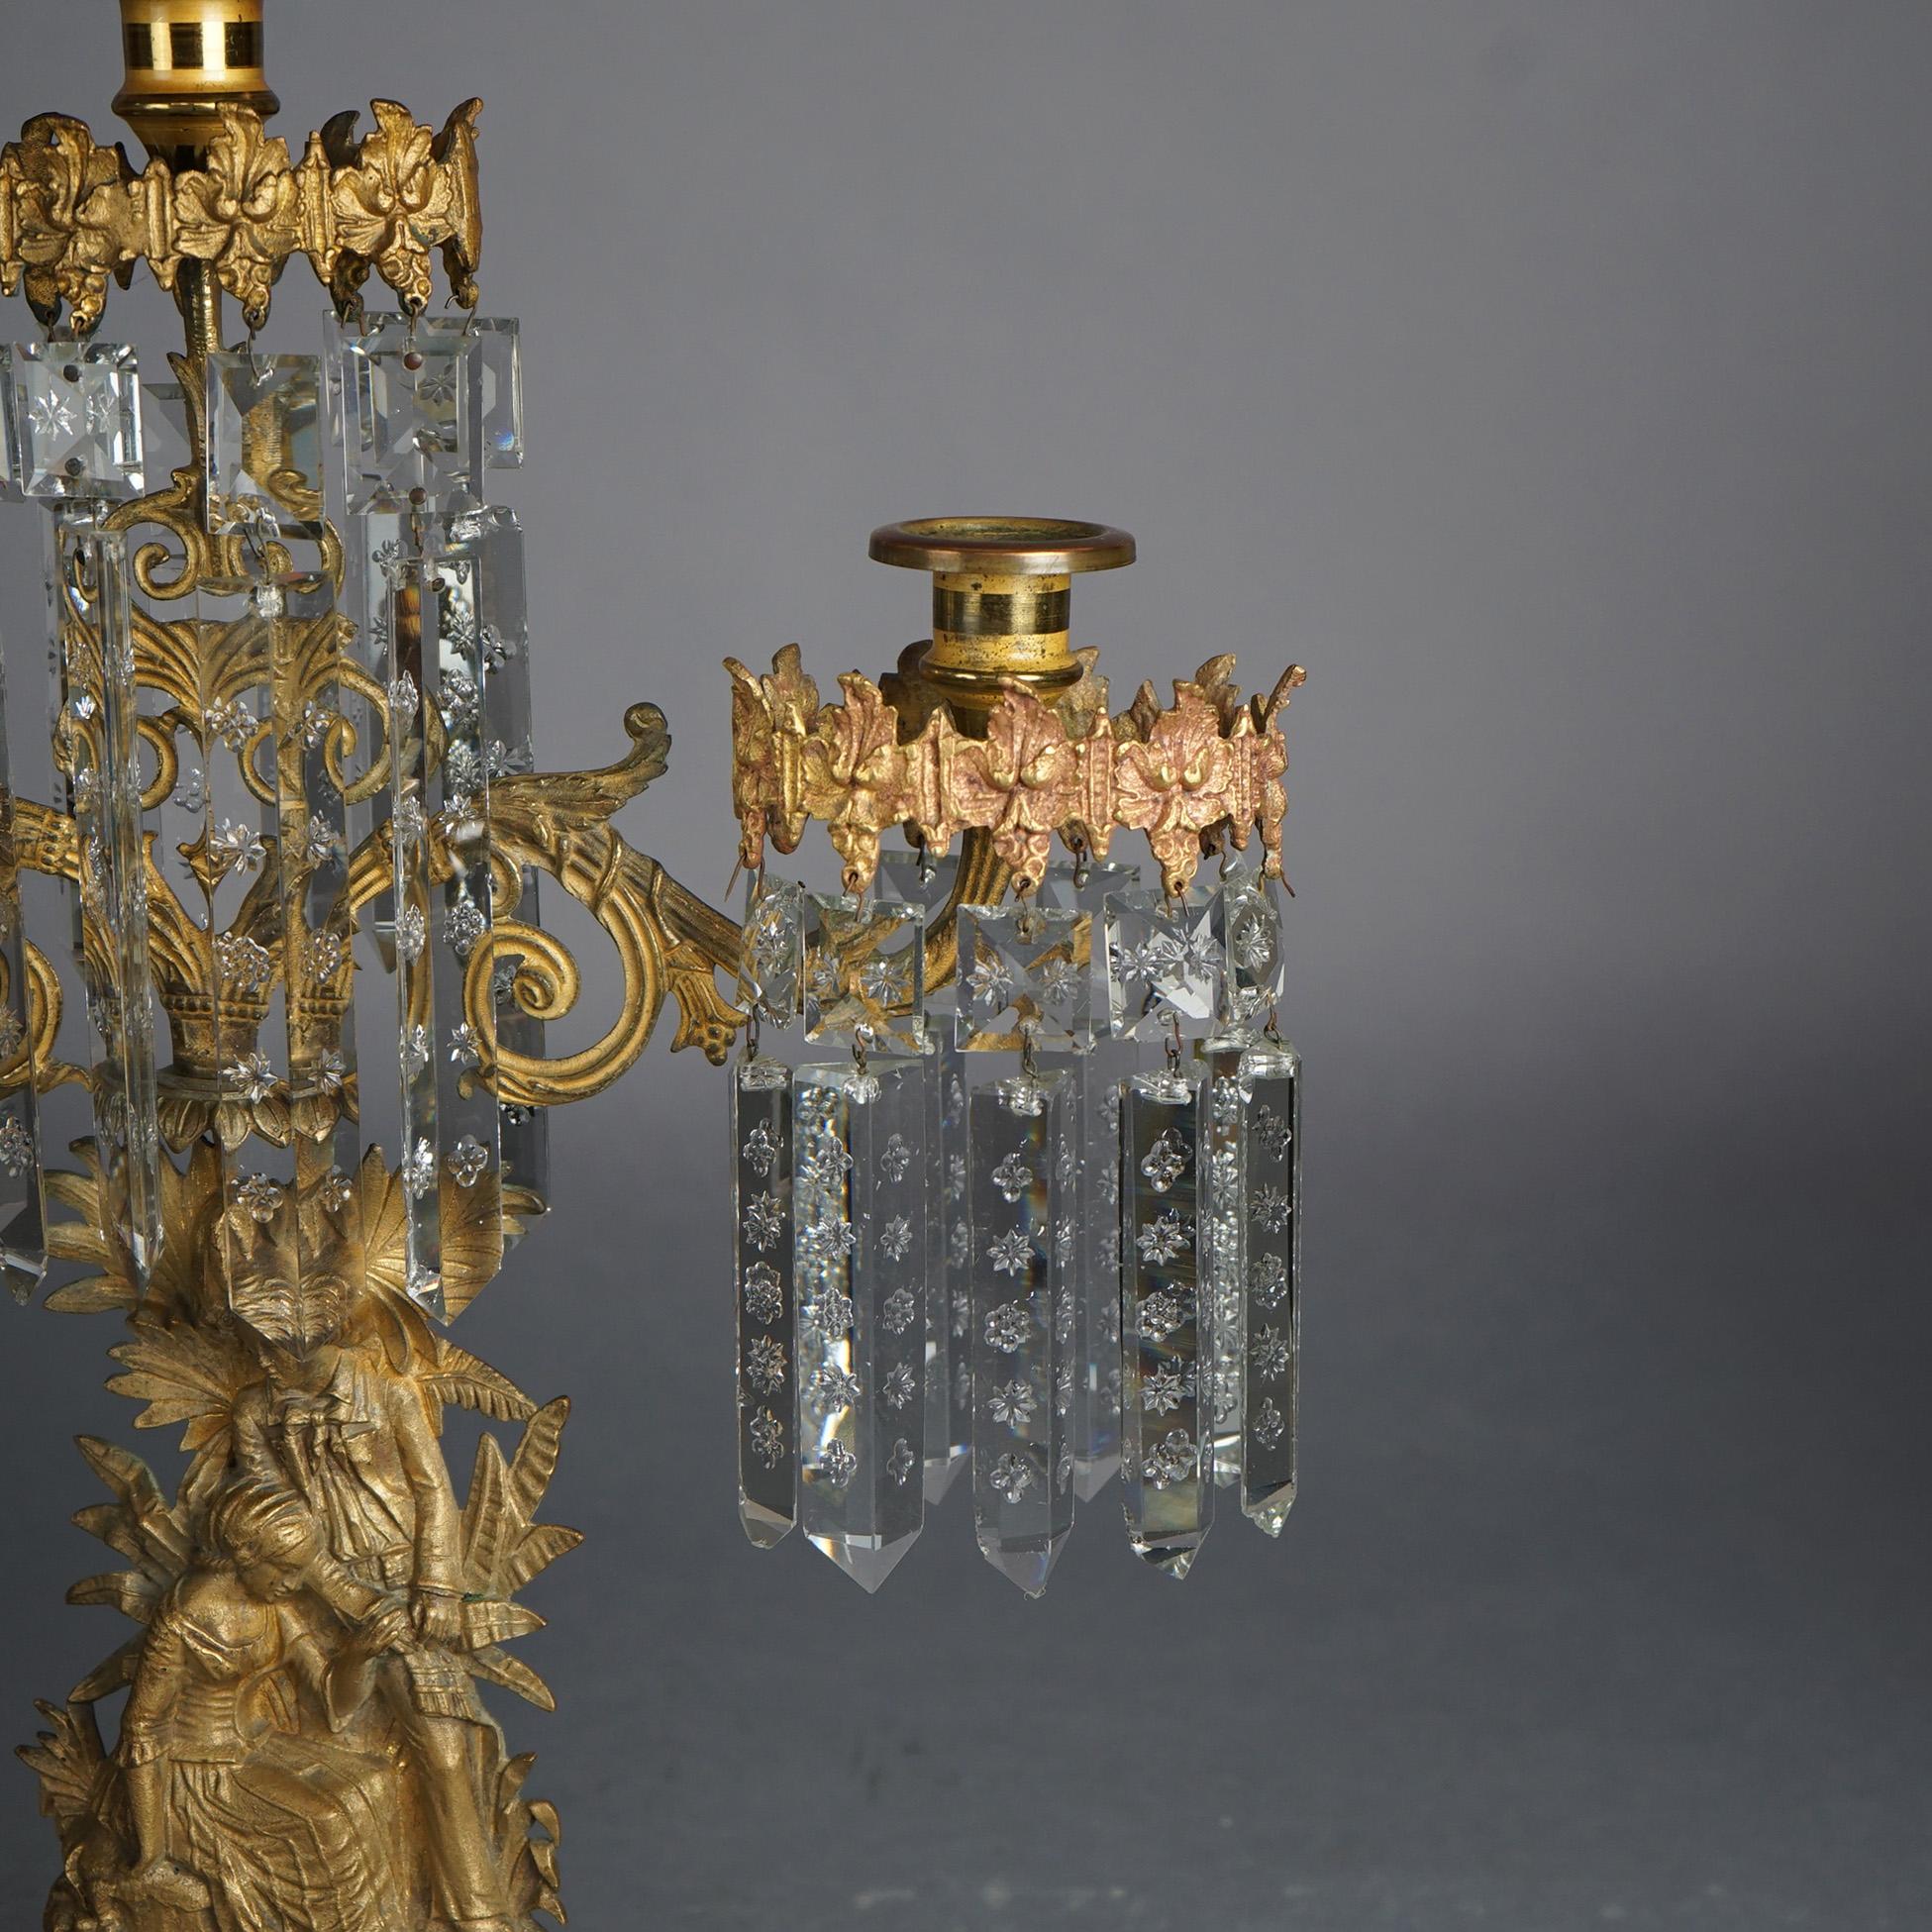 Antique Gilt Bronze American Girandole Candelabras with Marble & Crystals C1880 For Sale 10